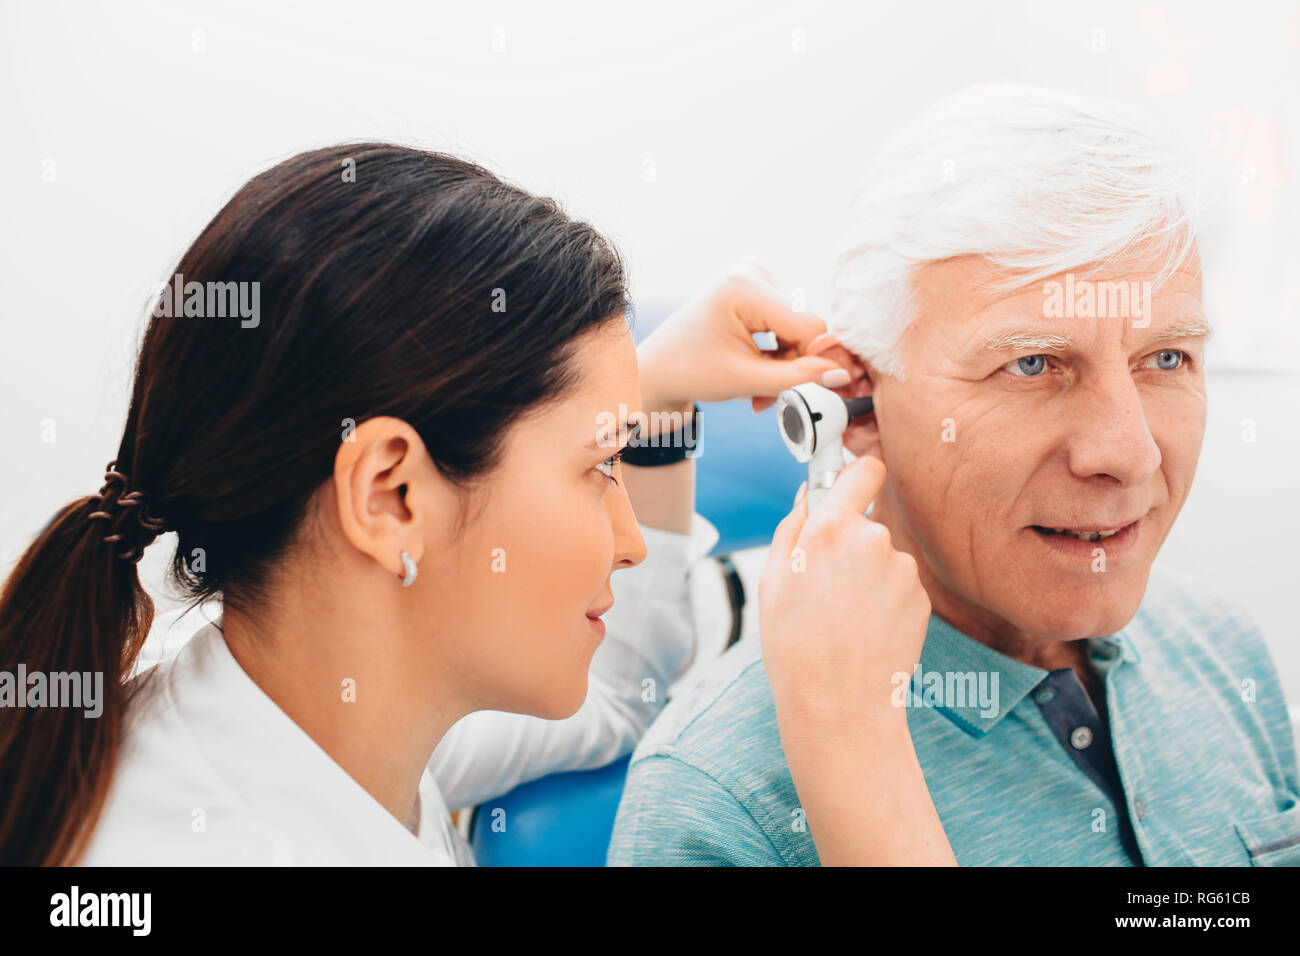 doctor examining elderly patient ear , using otoscope, in doctors office. Senior man getting medical ear exam at clinic. Stock Photo